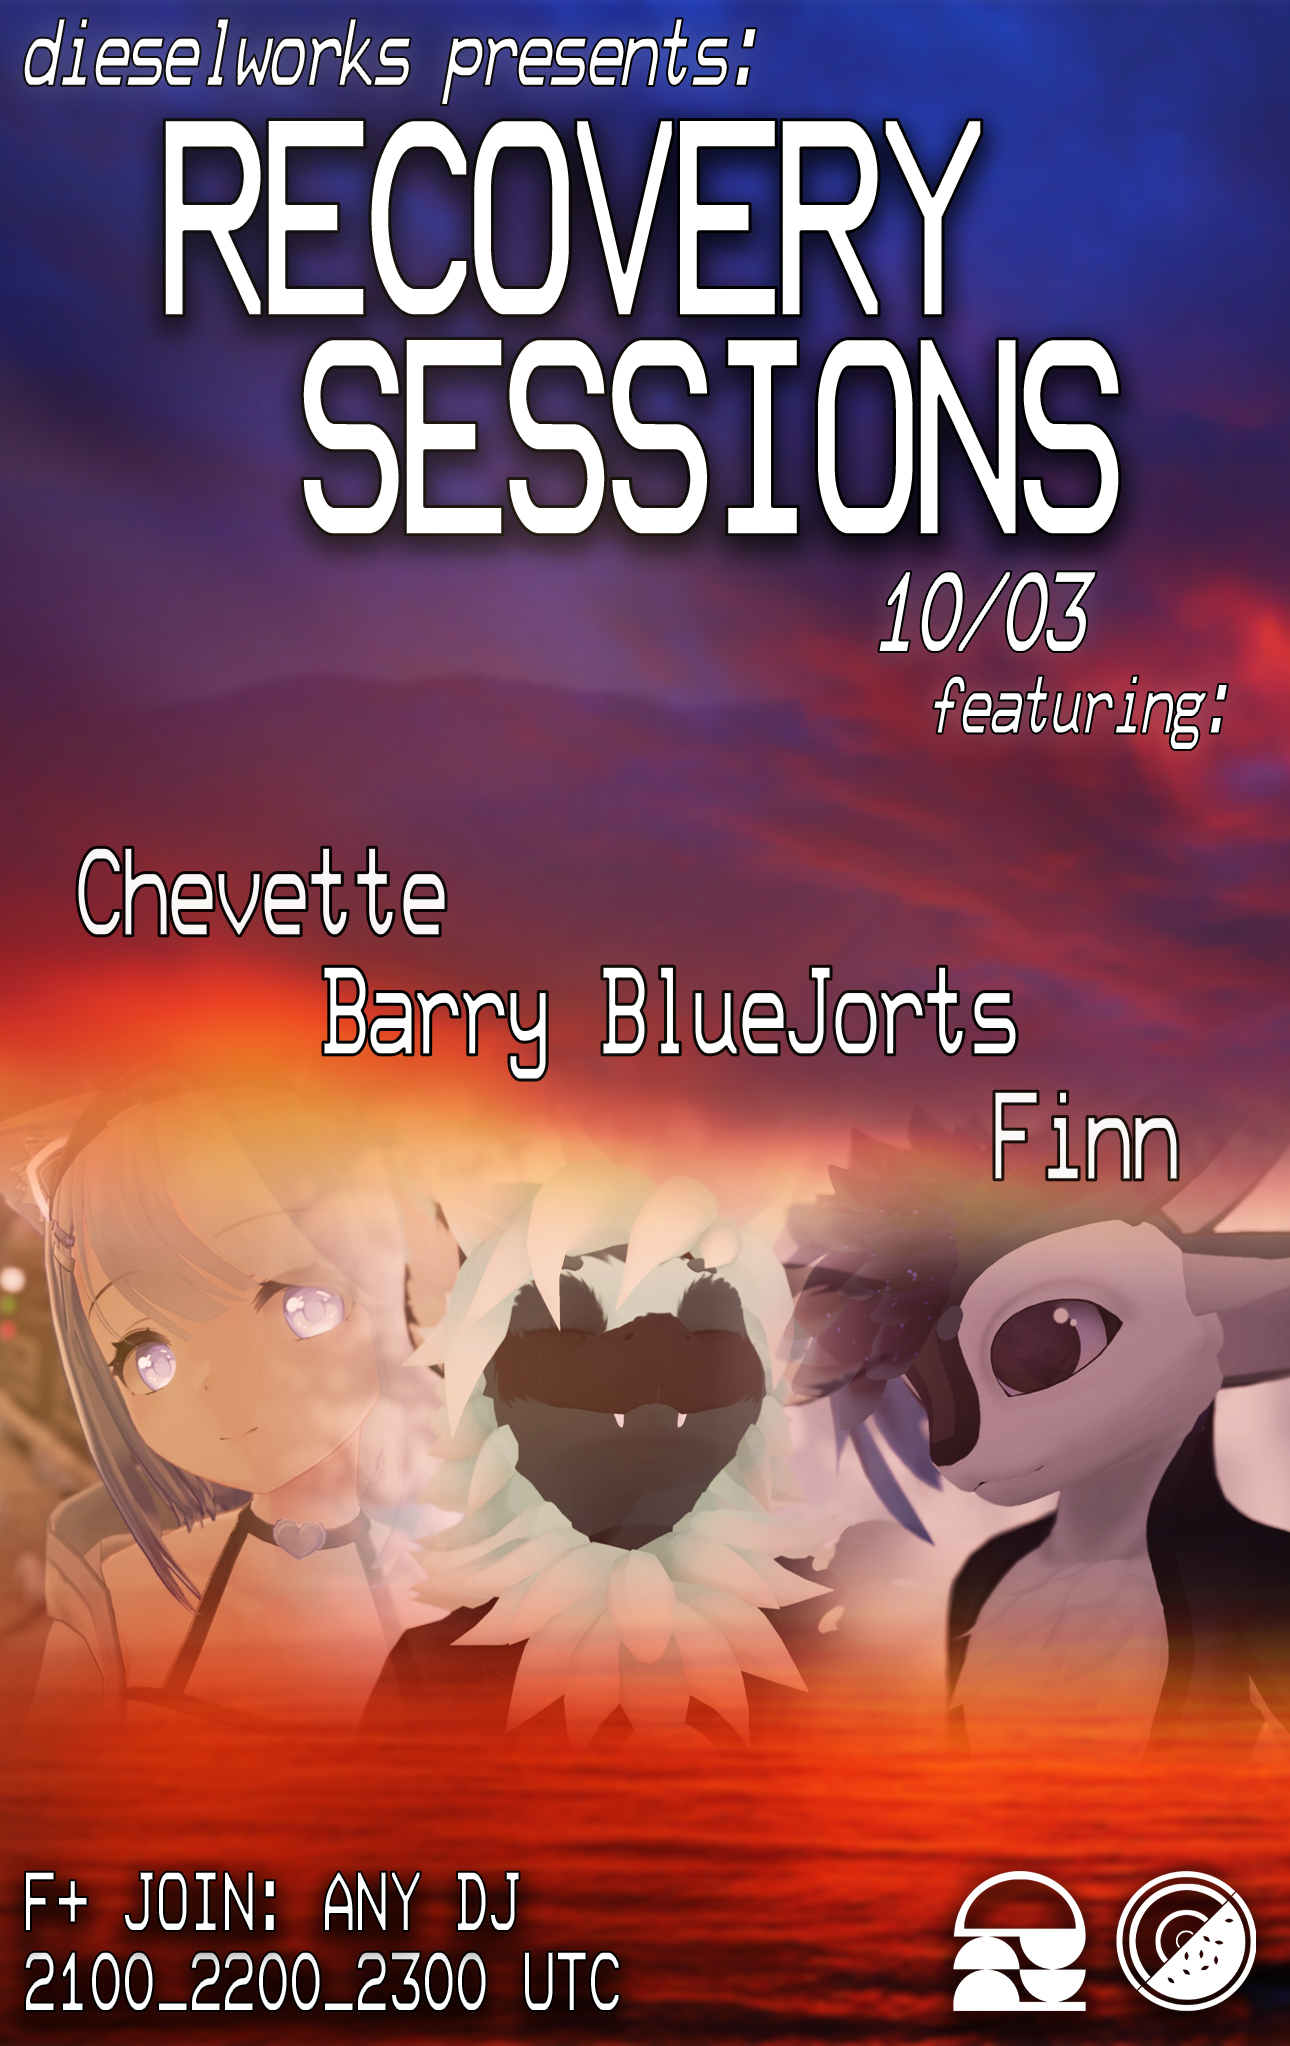 Flyer for Recovery Sessions